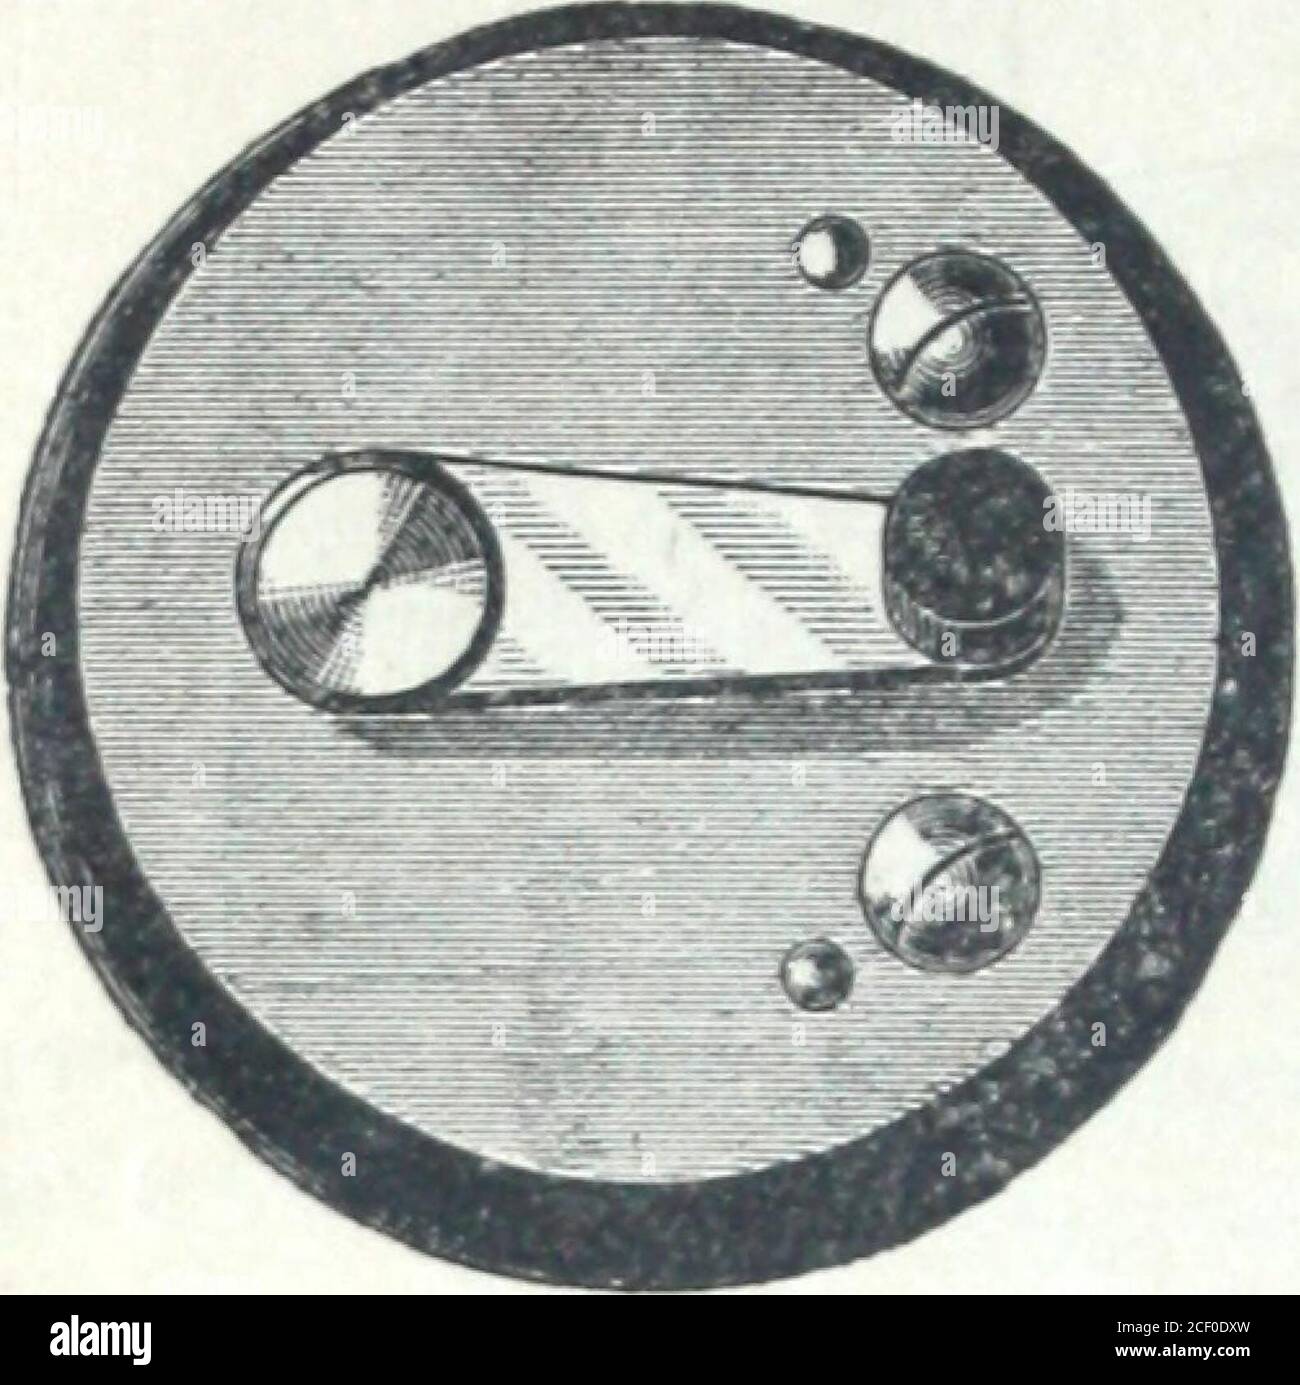 . Catalogue of O.D. Pierce & Co. manufacturers of and dealers in electrical supplies .... &lt; SI R 1 V Door Spring No. 2. Door Spring No. 1.Price $ 25 Price • • $ -0 34 O. D. PIERCE & CO., PHILADELPHIA, PA. BELL SWITCHES.. Switch No. 1, 1 Pt. No. 1 Switch Stock Photo